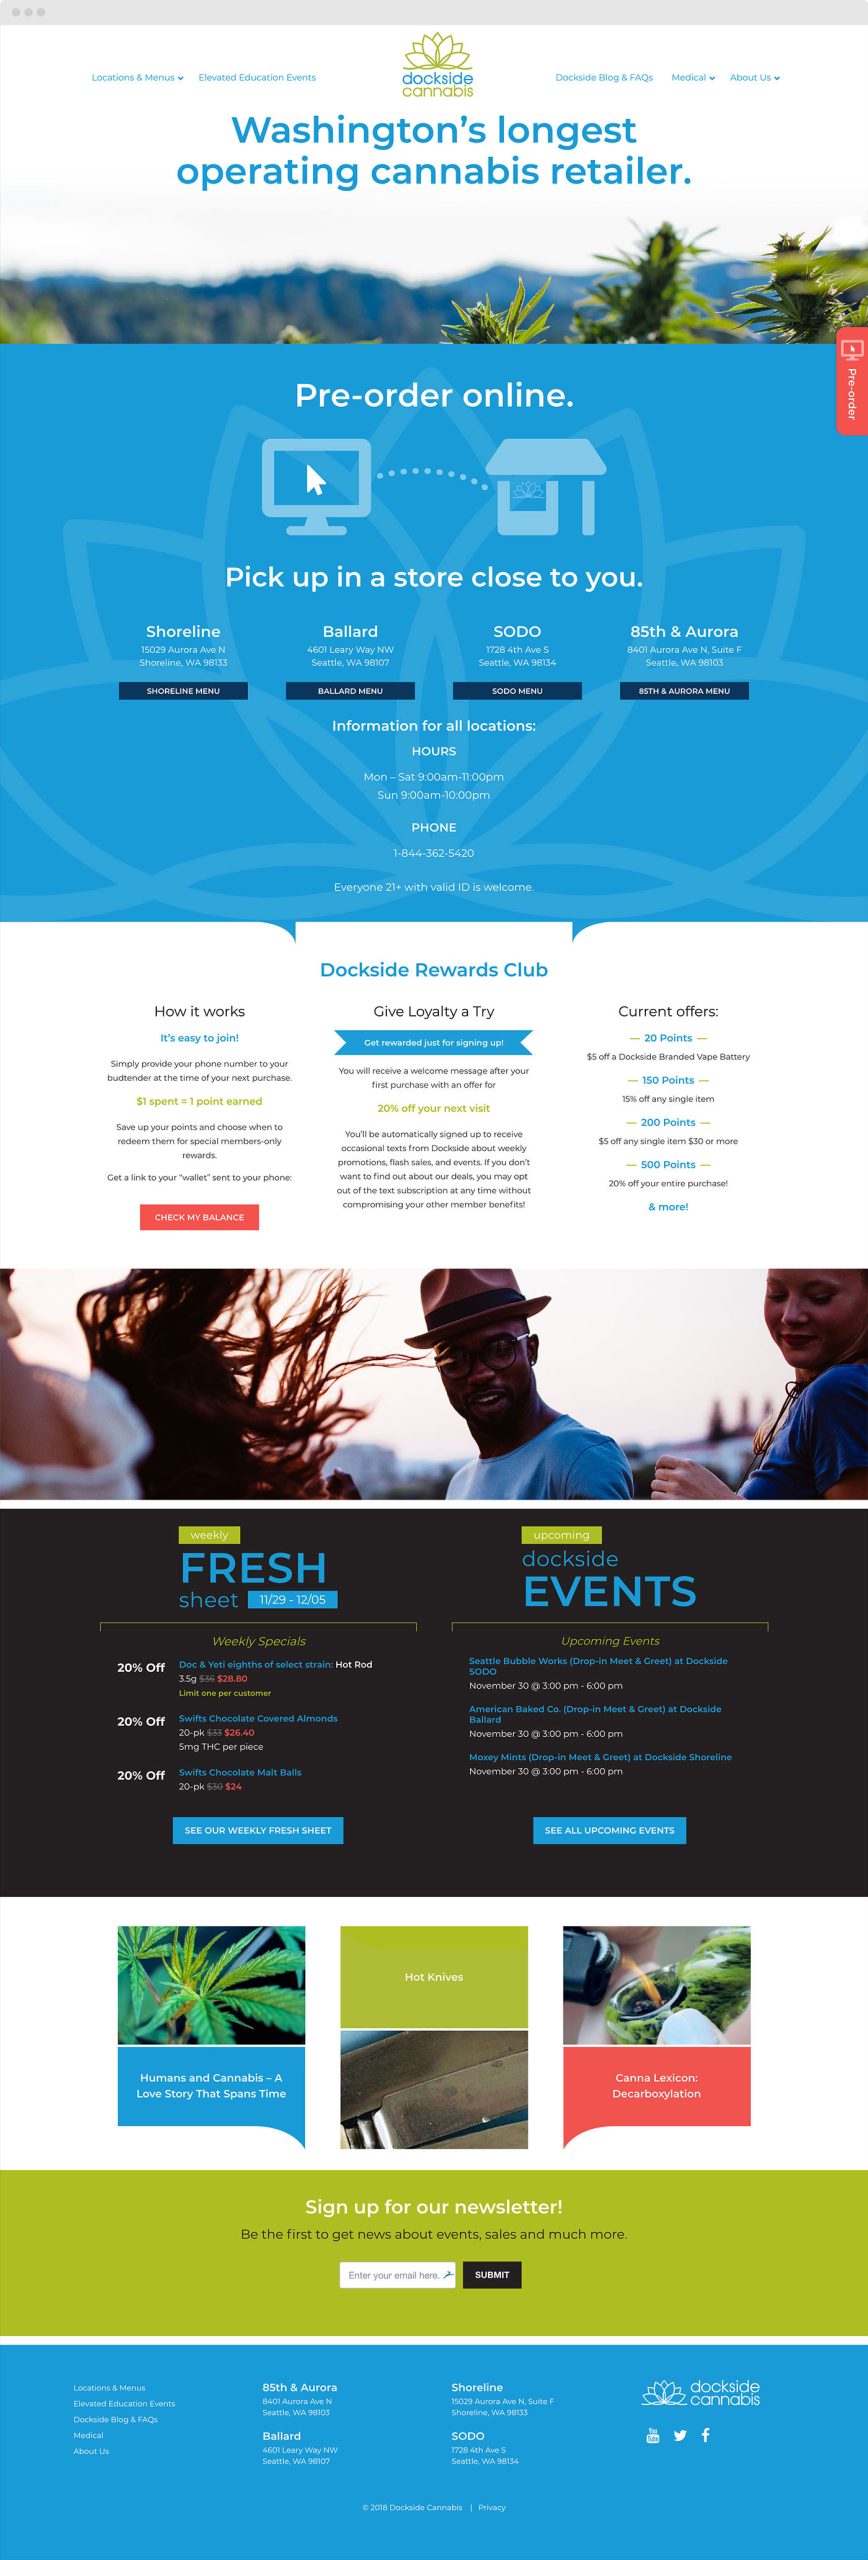 Dockside Cannabis Website Home Page Designed by Craig Labenz